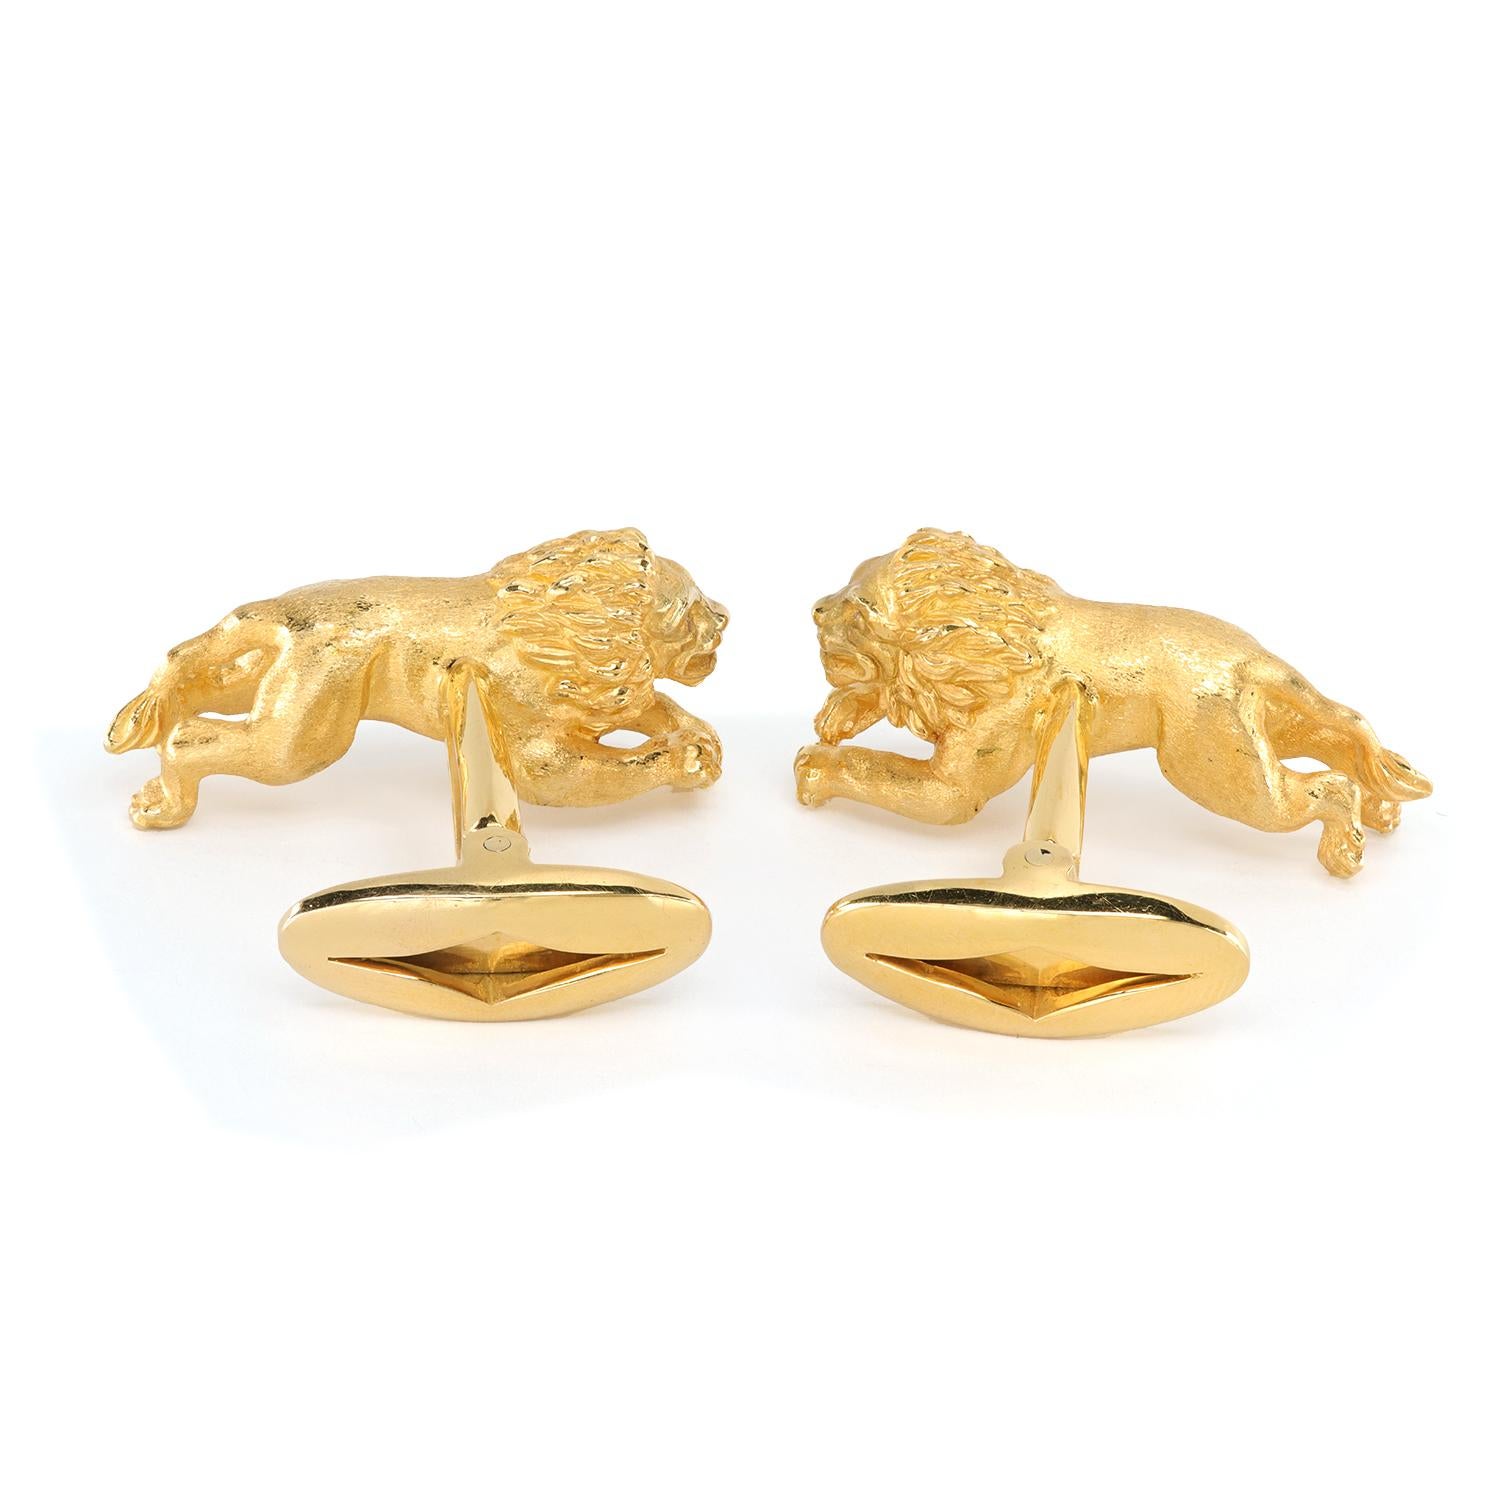 Contemporary Vintage 18k Yellow Gold Sculptured One-of-a-kind Cufflinks with Diamond Eyes For Sale